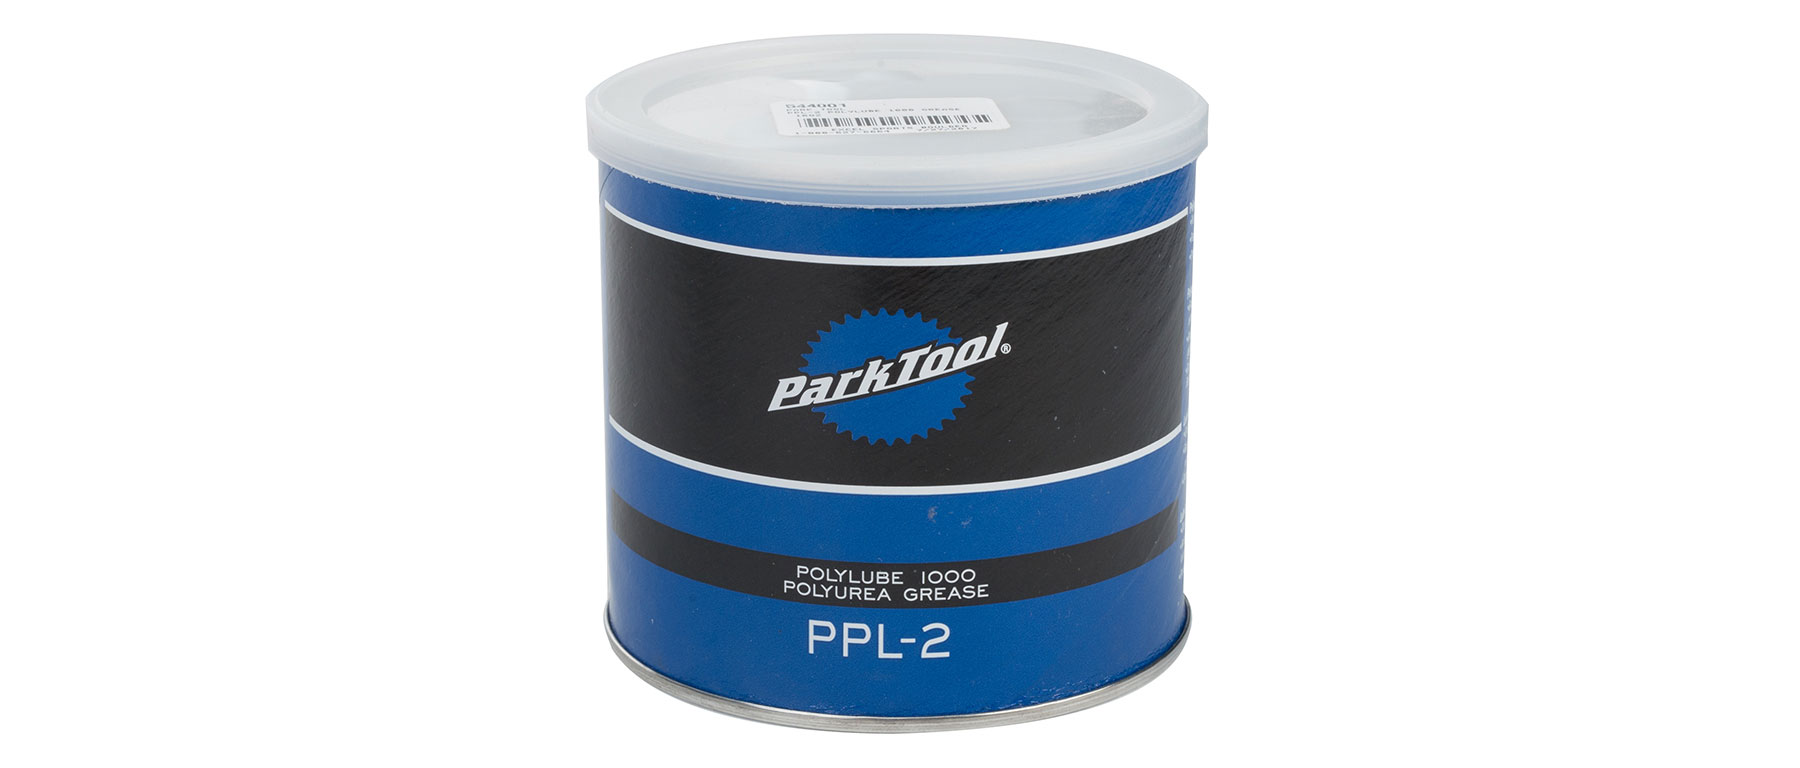 Park Tool PPL-2 PolyLube 1000 Grease